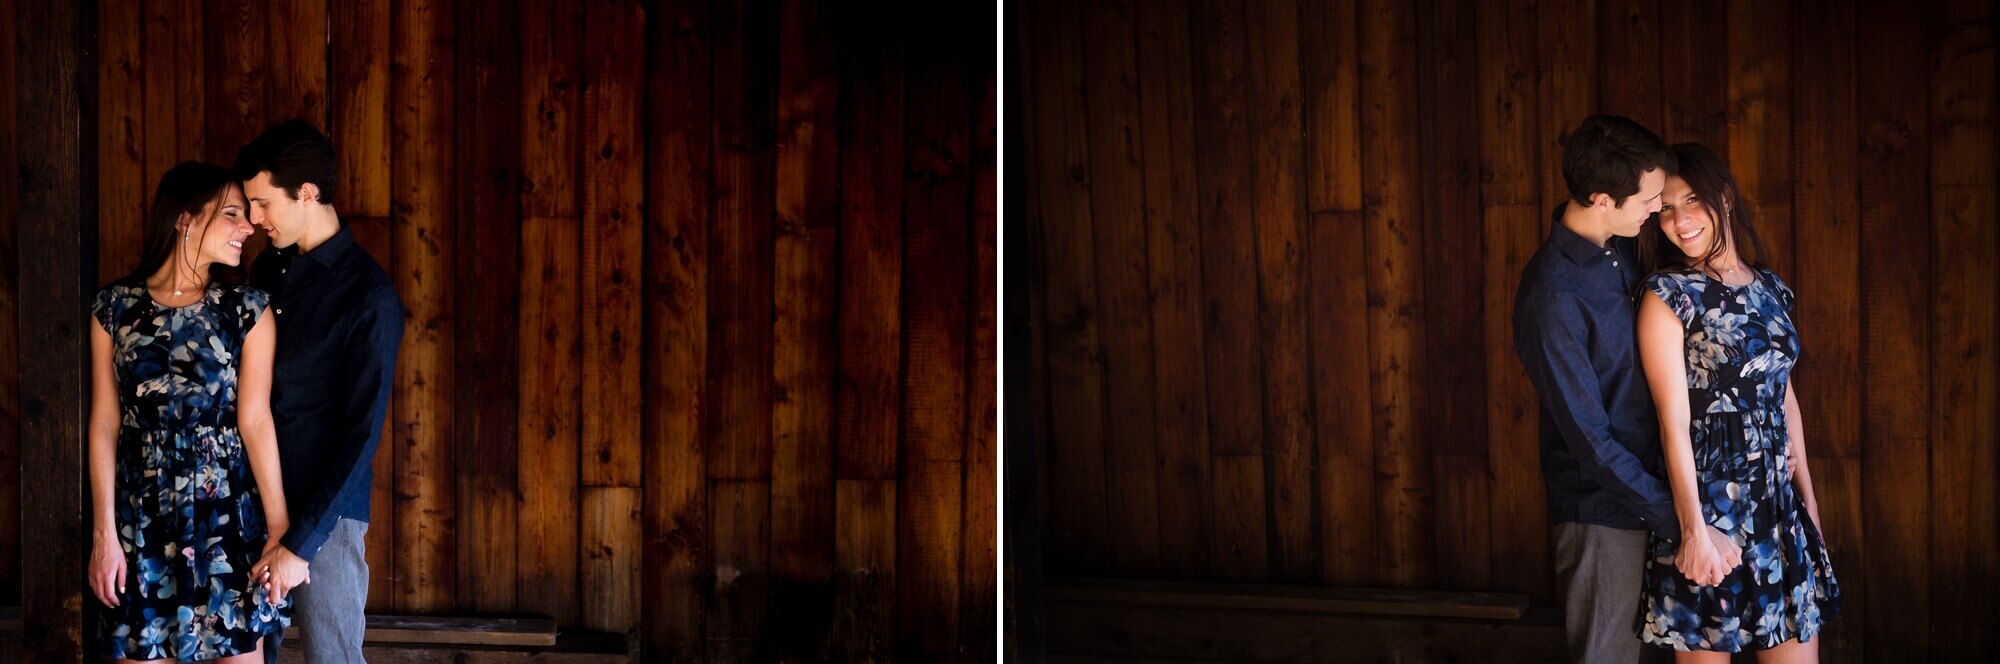 The couple is posed in front of rustic barn wood for a Toronto engagement session